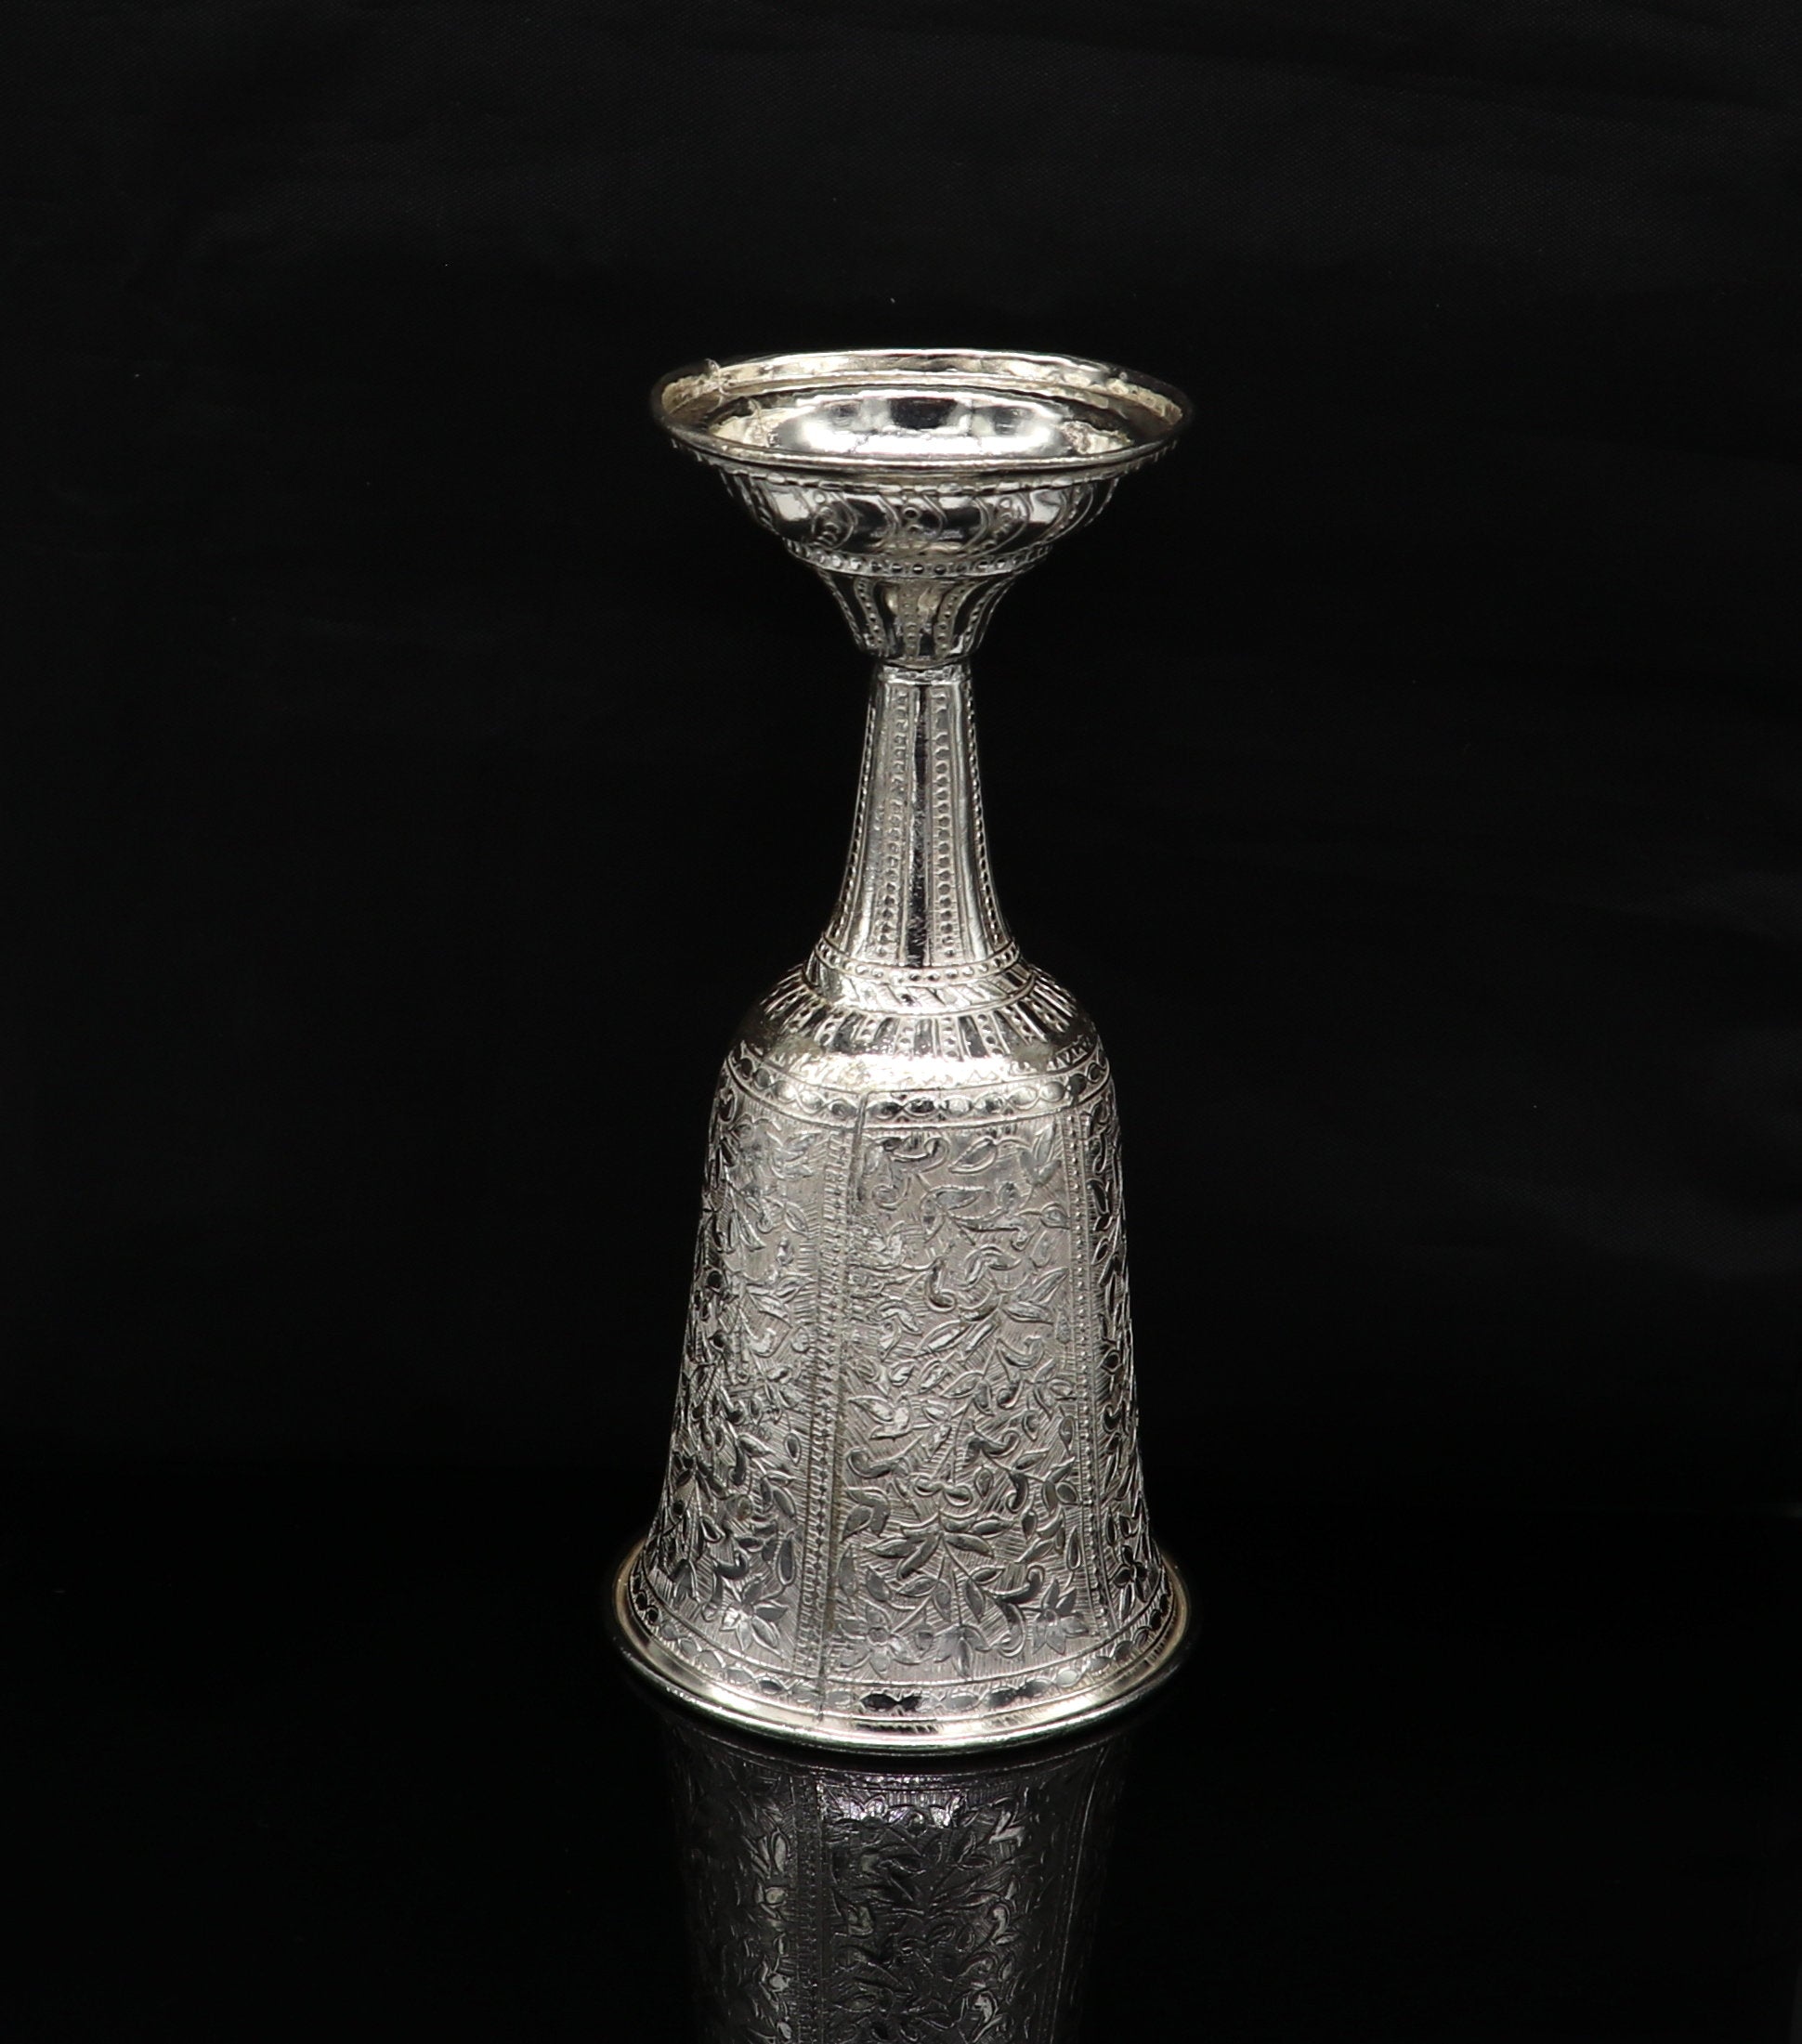 925 fine silver handmade vessel, water/milk wine Glass tumbler, silver flask, silver utensils or articles stay healthy from bacteria sv35 - TRIBAL ORNAMENTS